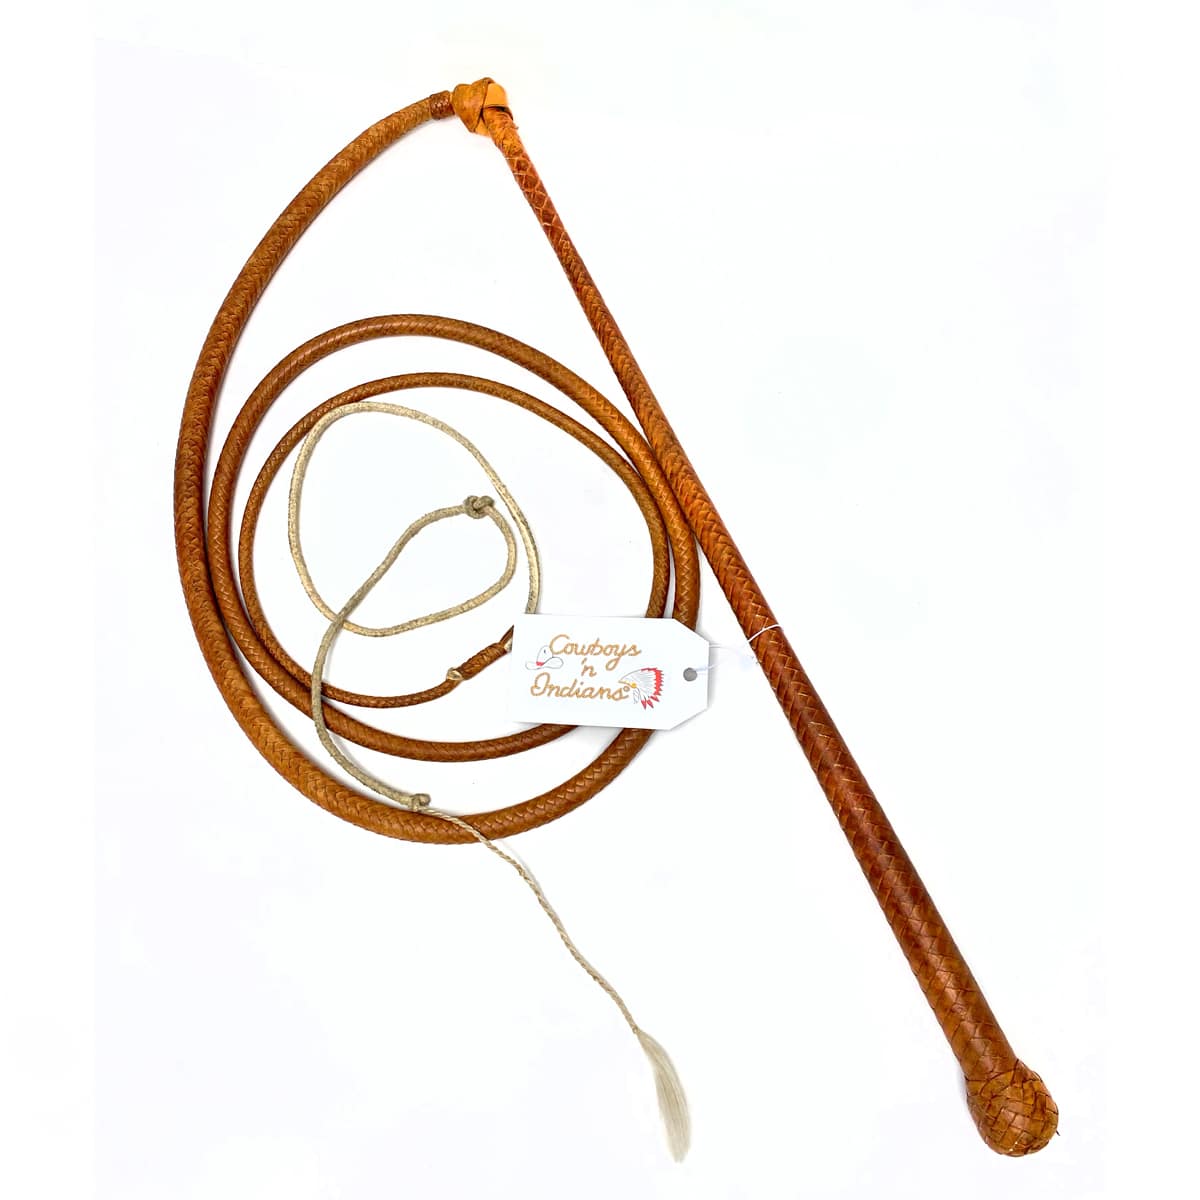 Cowboys n Indians™ 6′ Leather Whip